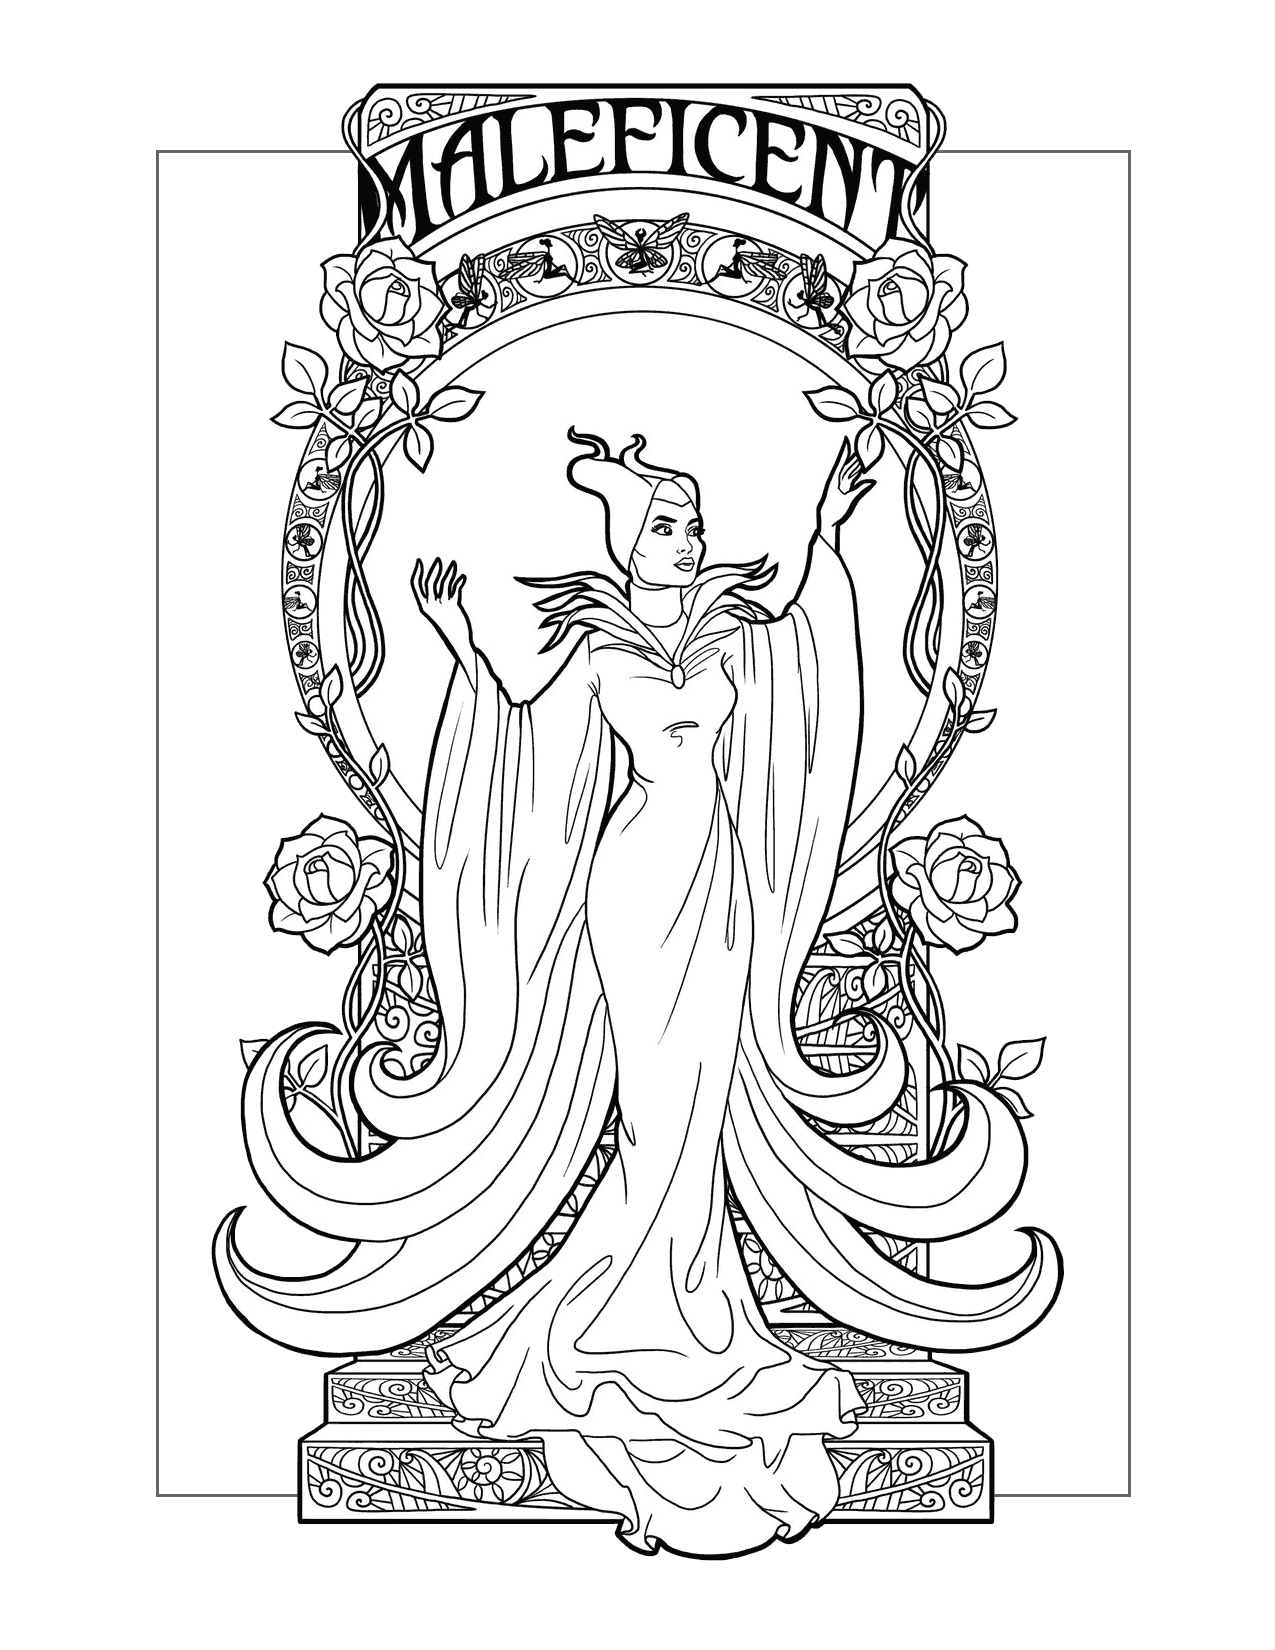 Maleficent Sleeping Beauty Coloring Page